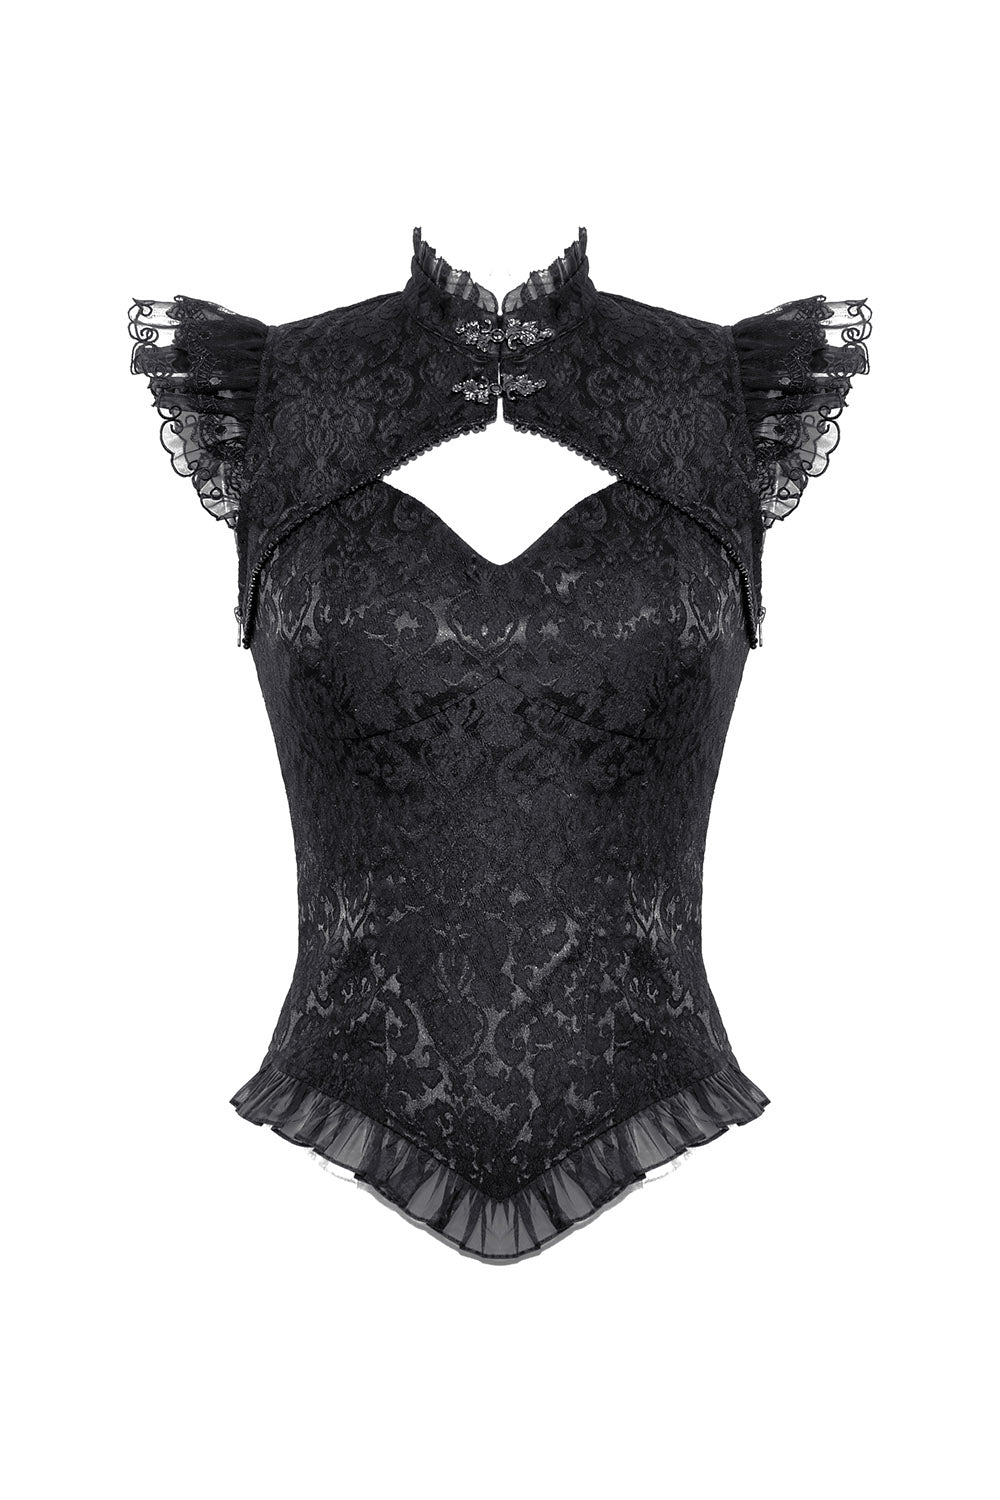 womens vintage gothic damask pattern top